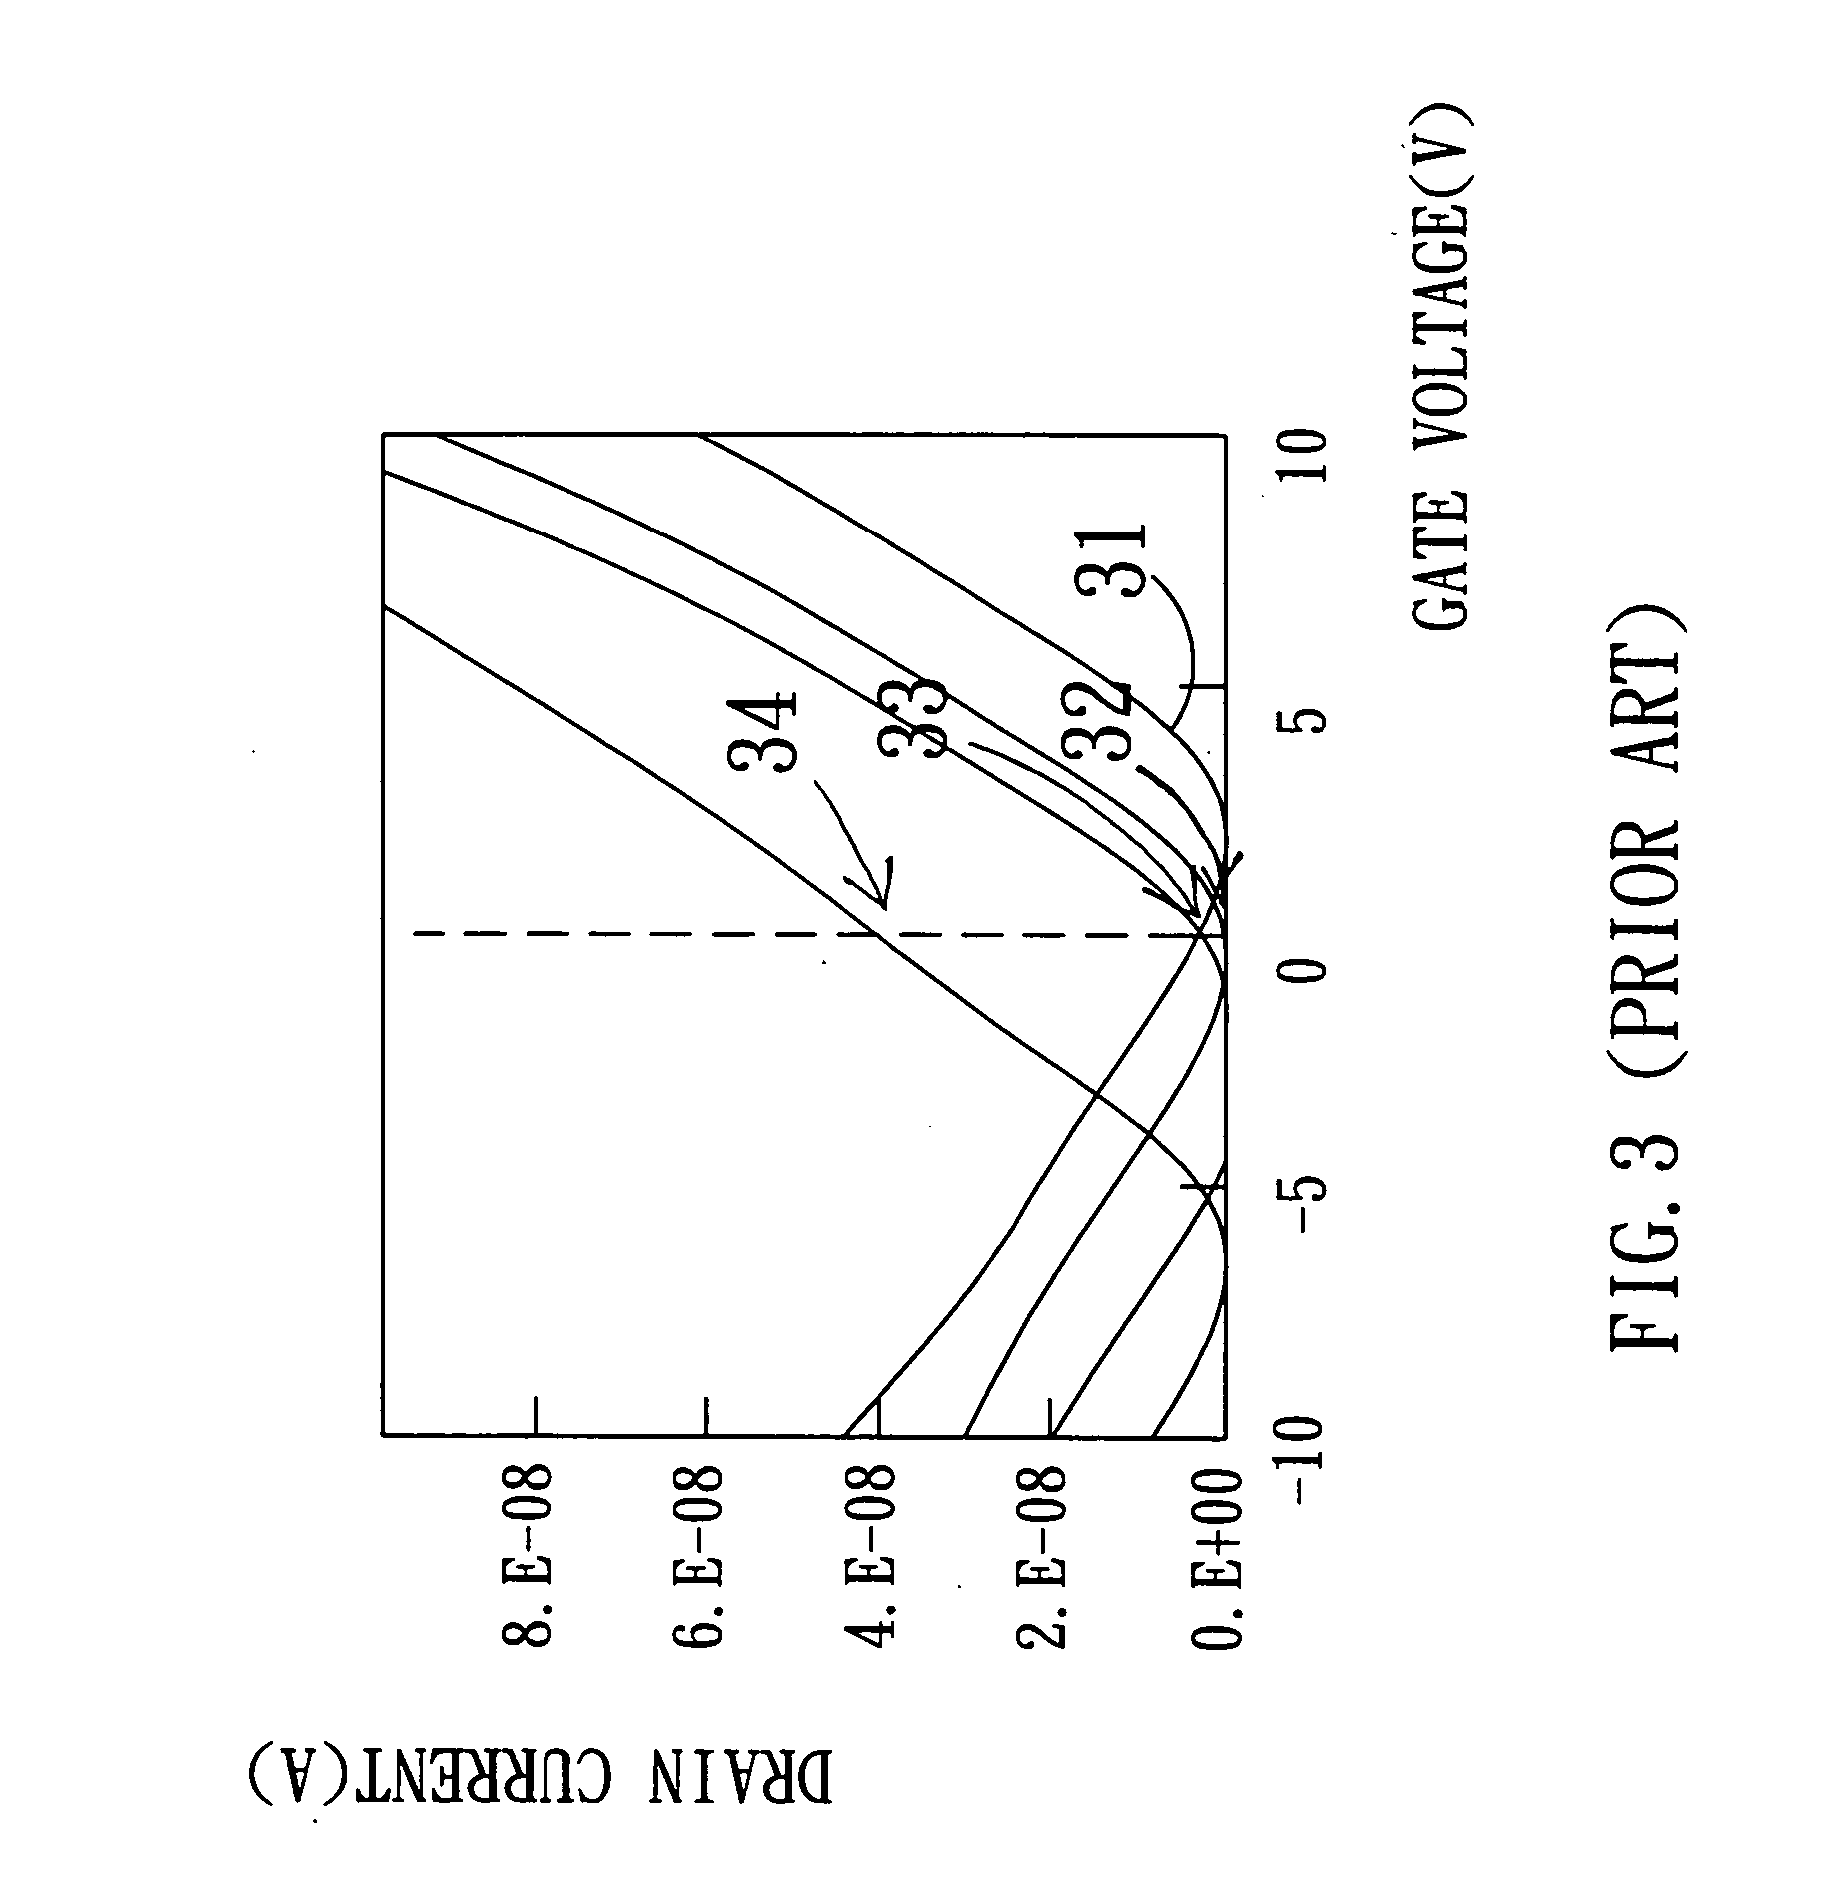 Structure and manufacturing process of a nano device transistor for a biosensor